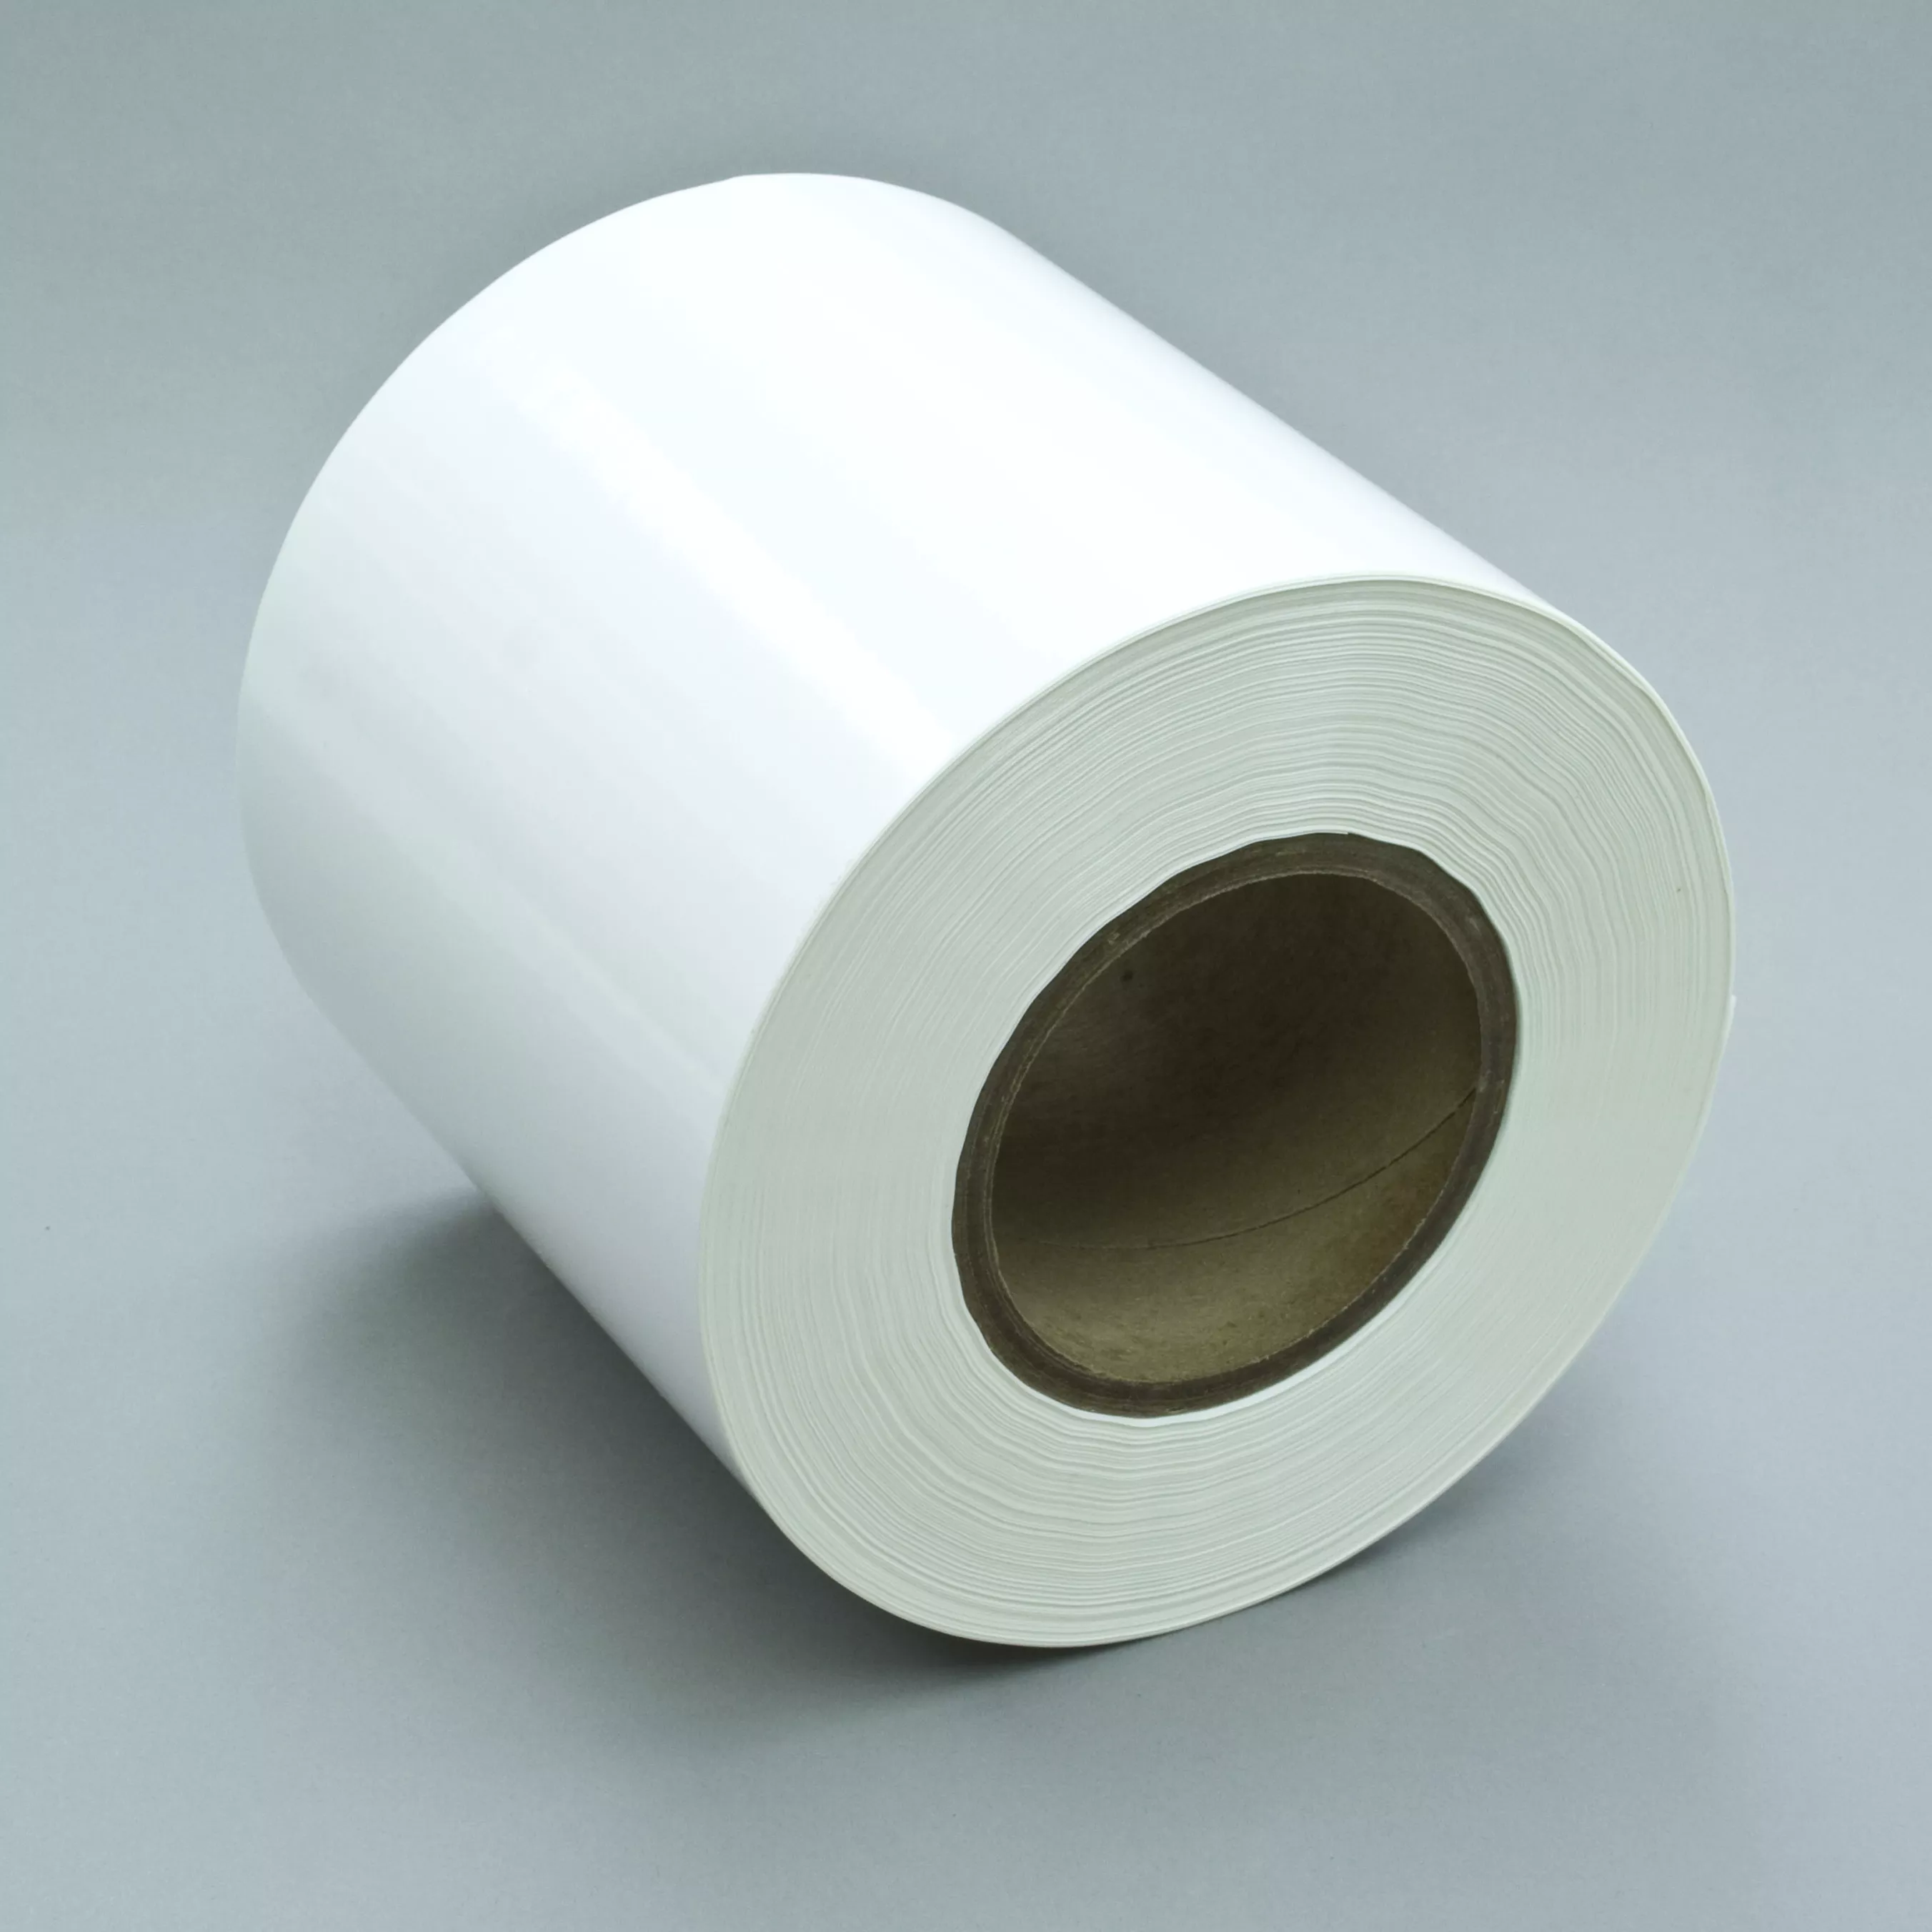 3M™ Press Printable Label Material 7871, White Polyester Gloss, 6 in x
1668 ft, 1 Roll/Case